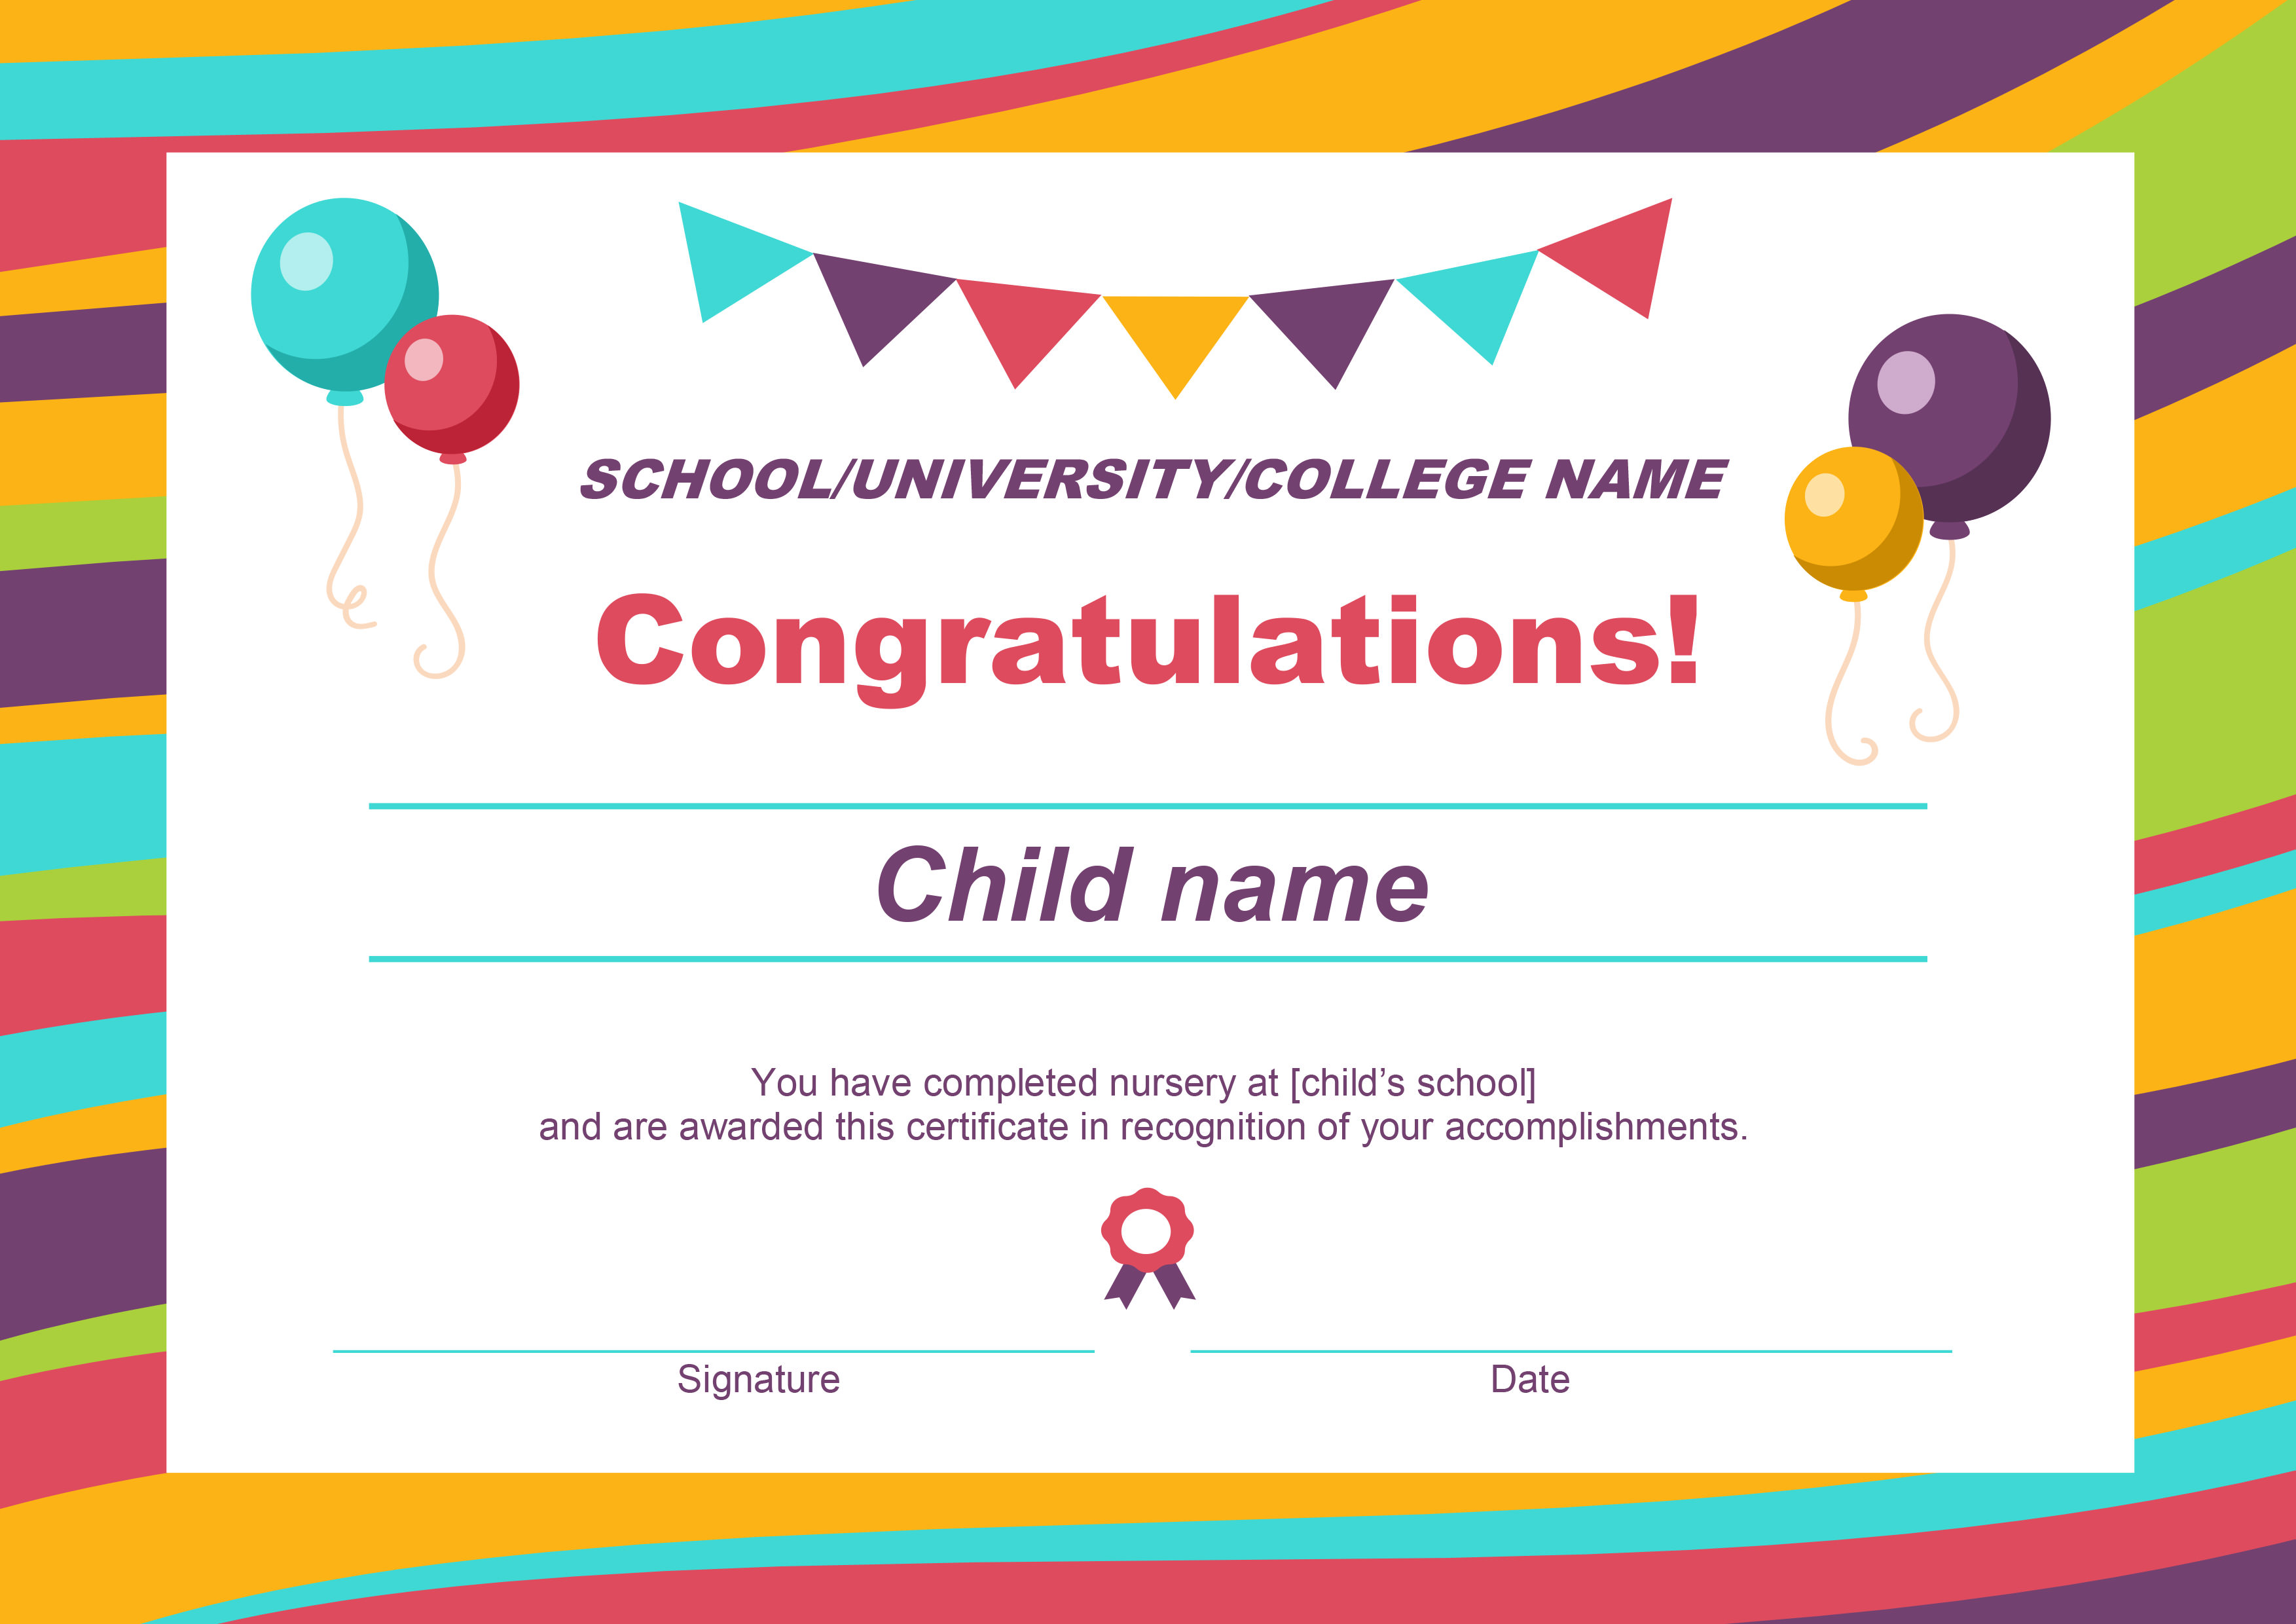 21 Free Creative Blank Certificate Templates In PSD Photoshop Regarding Free Printable Certificate Templates For Kids